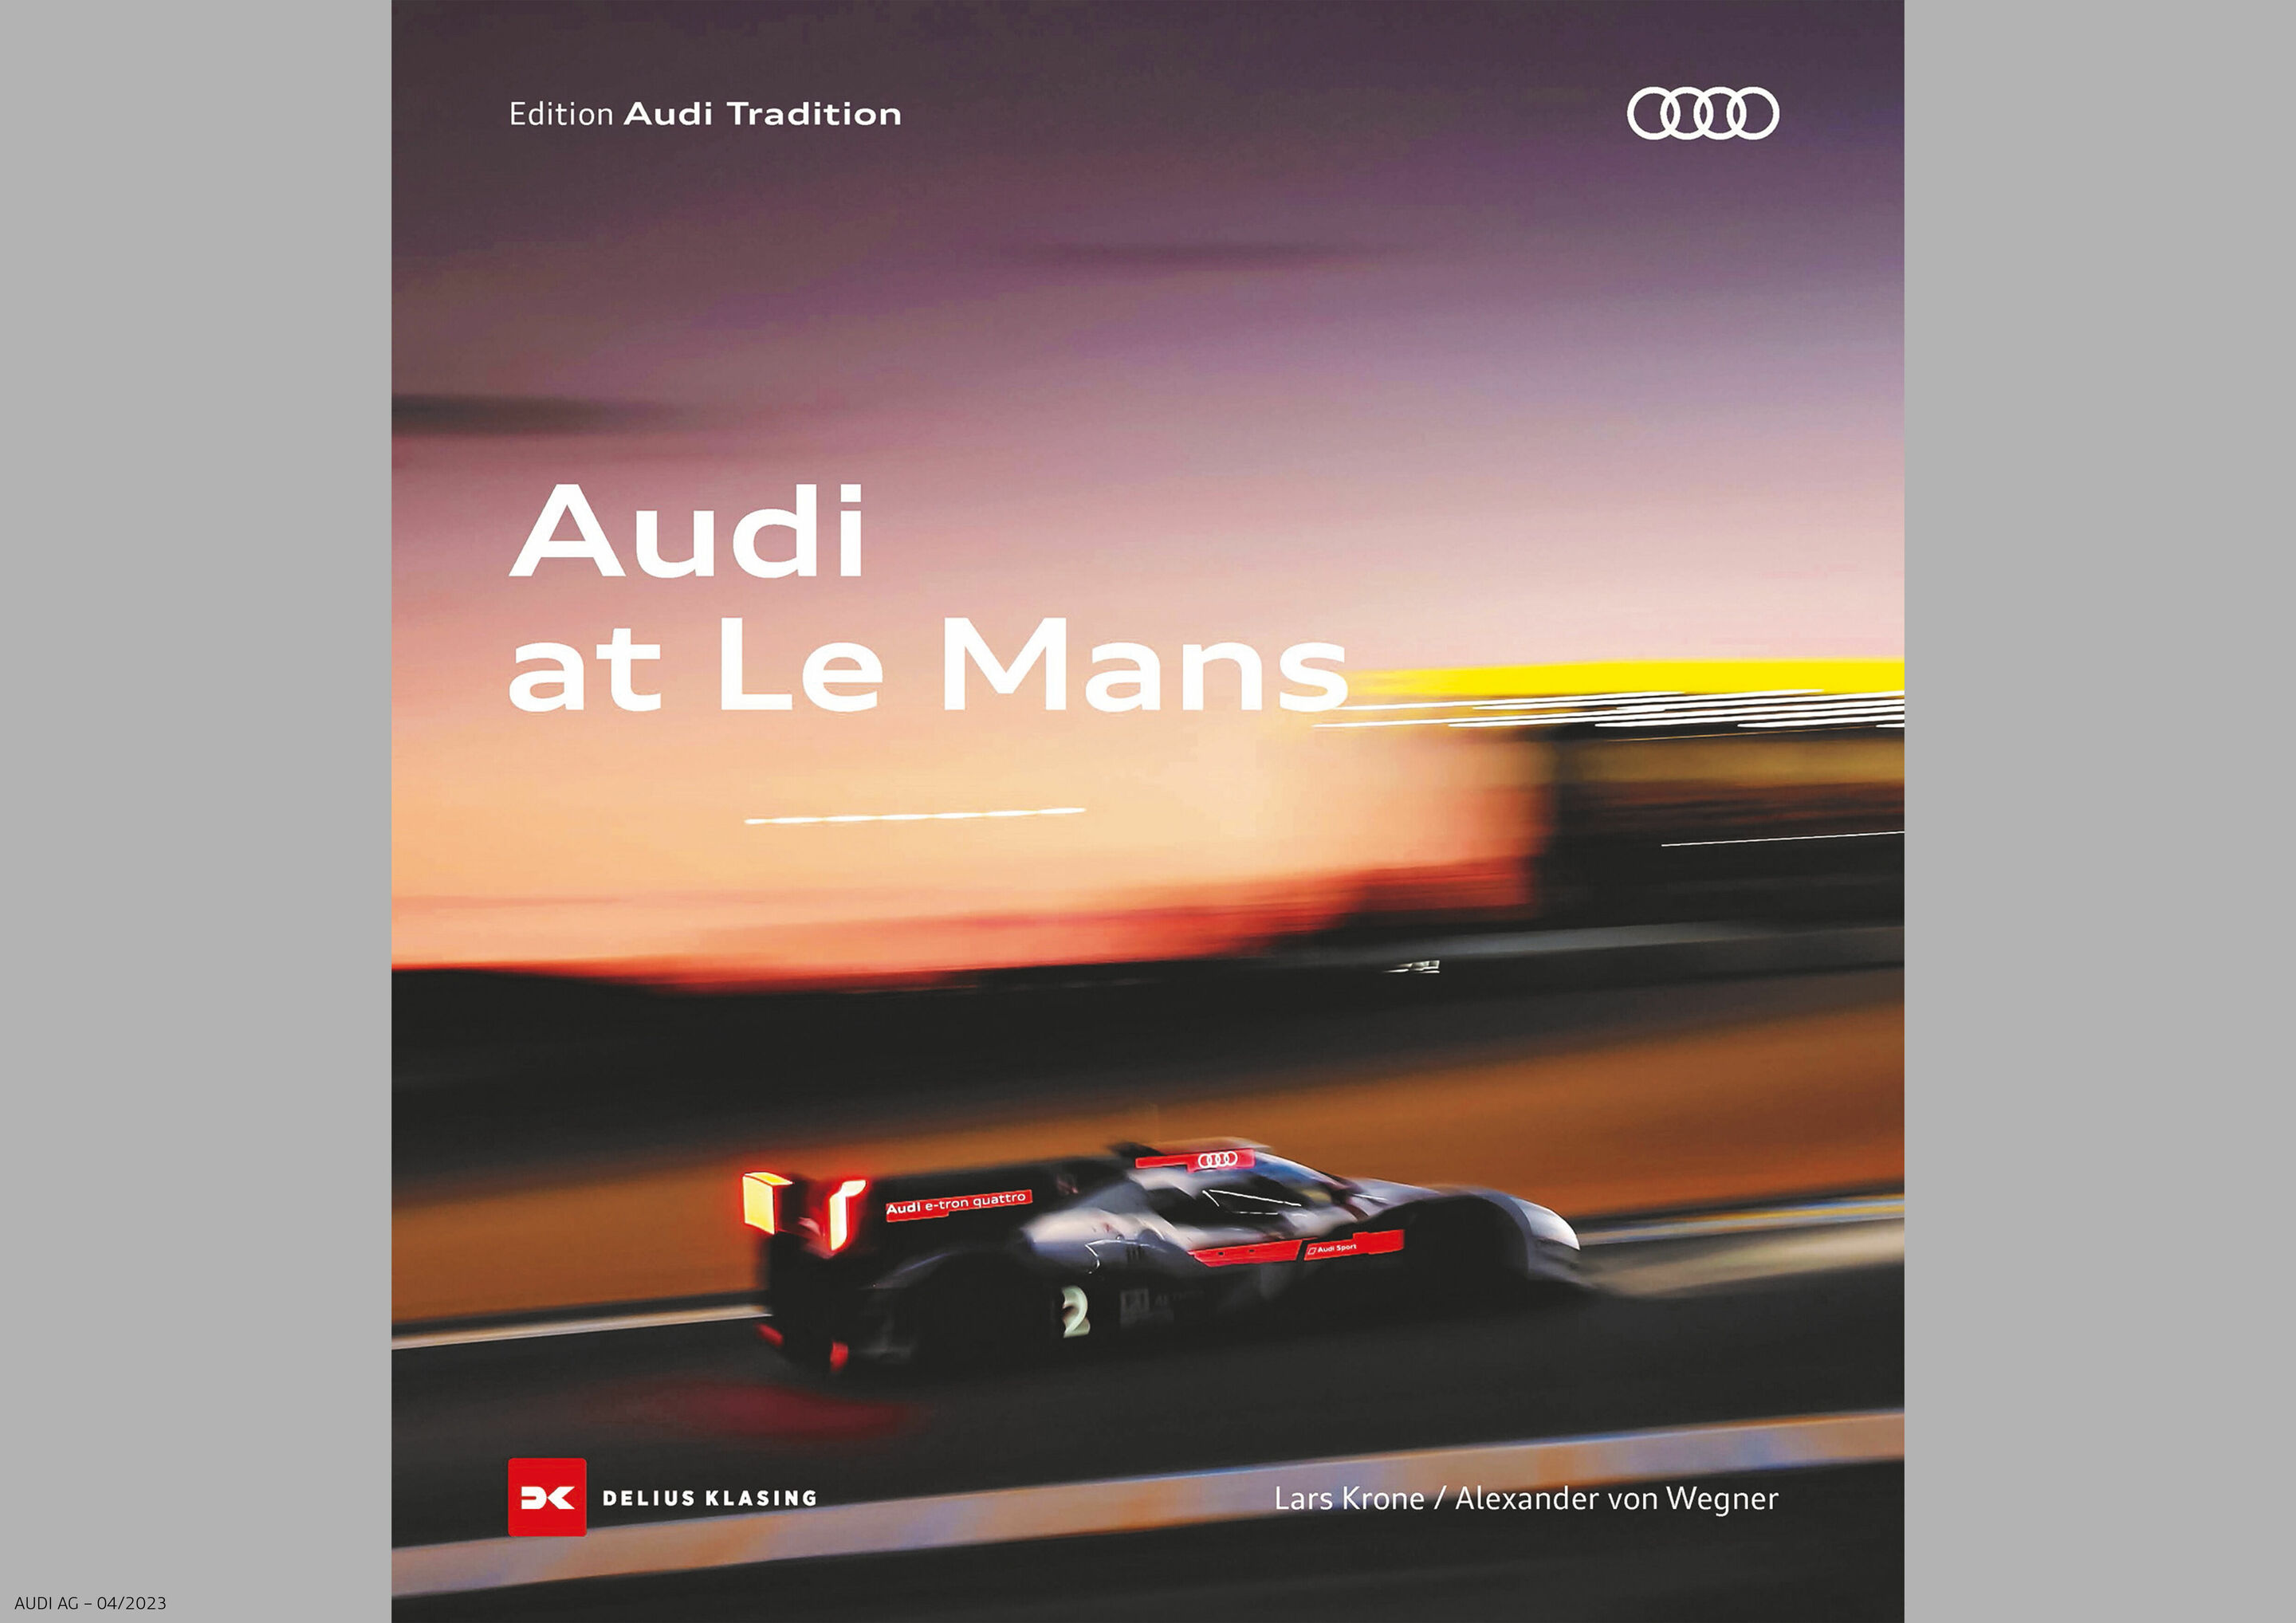 New book from Audi Tradition: “Audi at Le Mans”